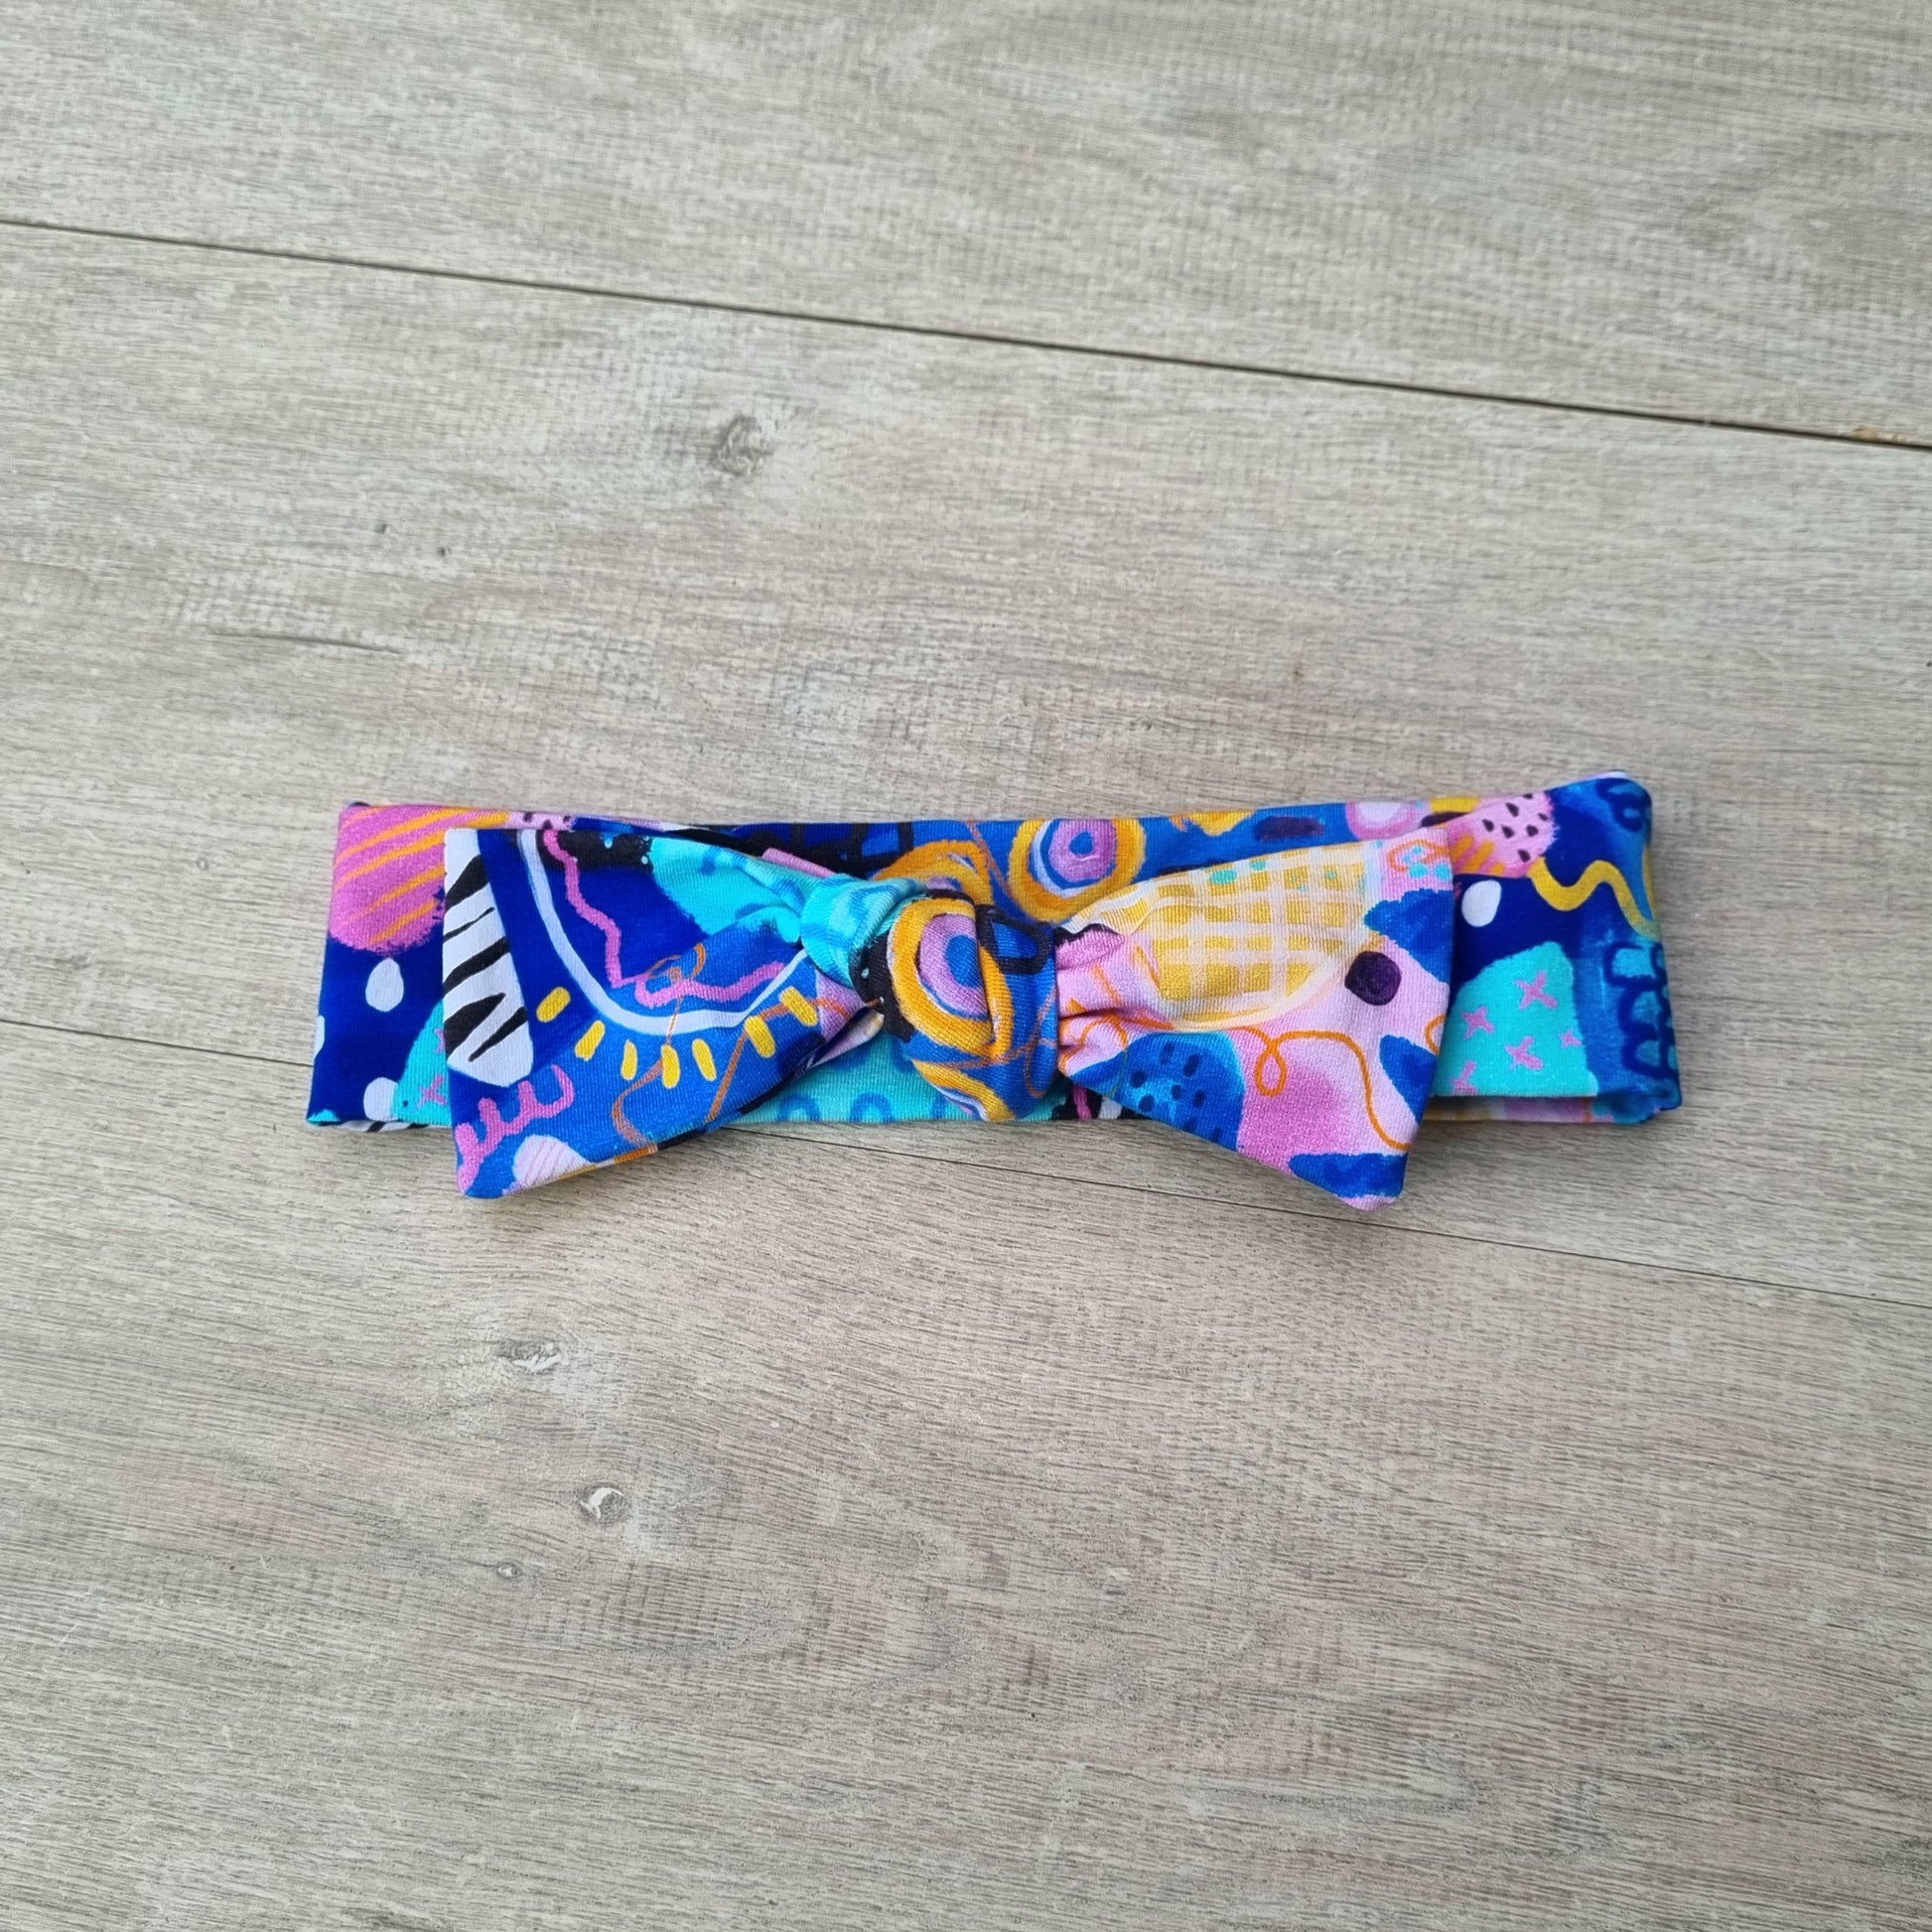 Top Knot Headband - Swirls against wooden backdrop. Blue, orange and purple abstract pattern on pink background.